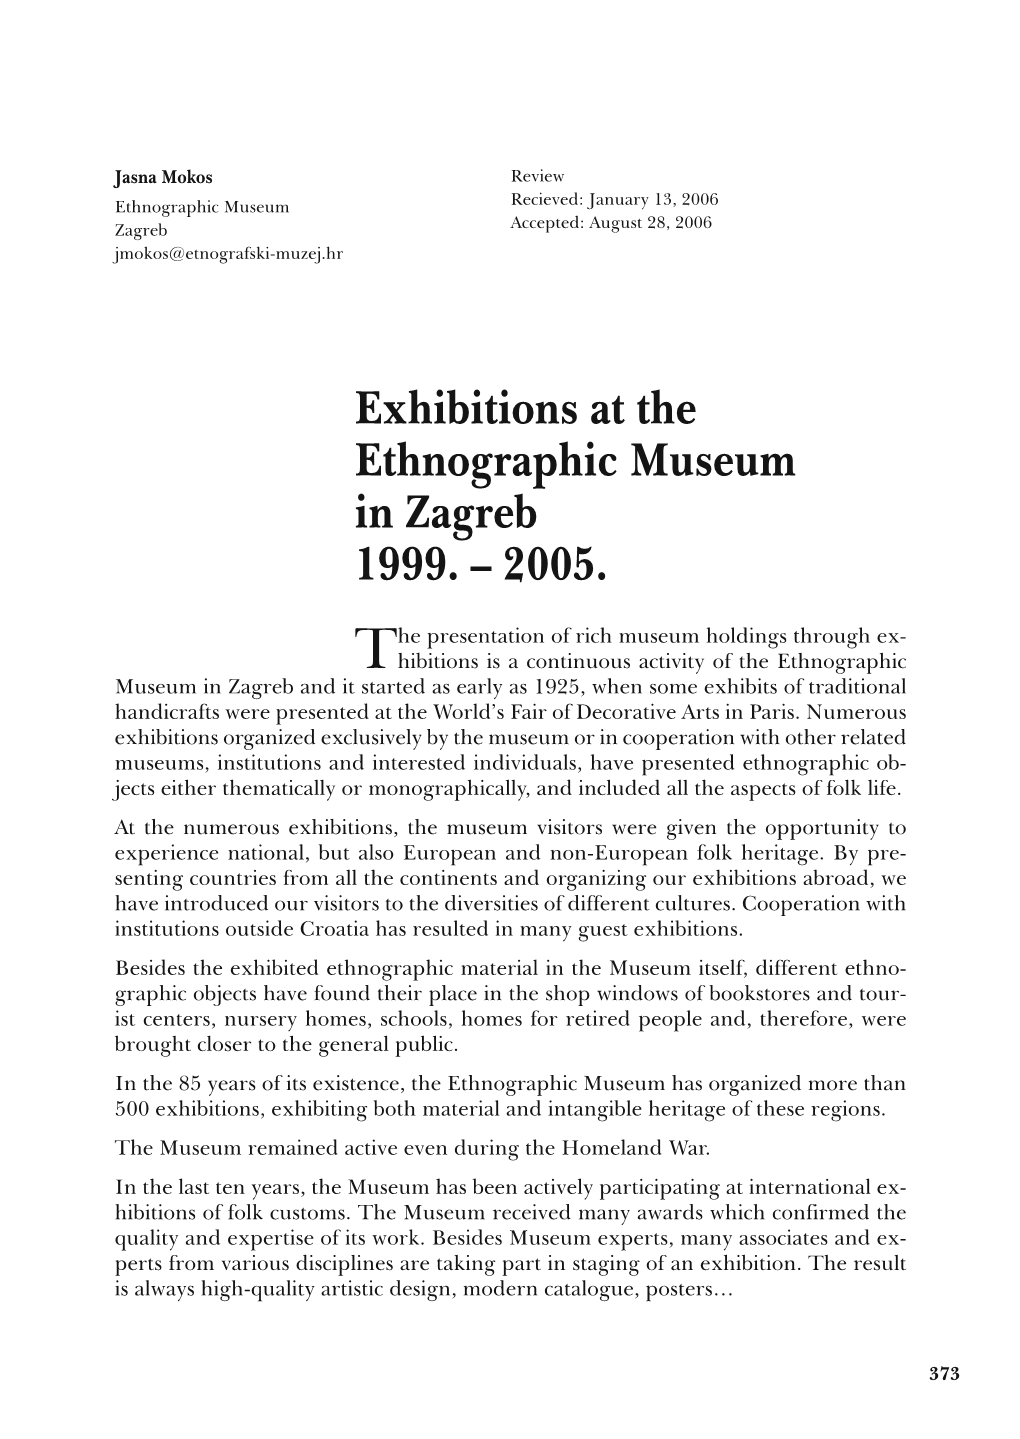 Exhibitions at the Ethnographic Museum in Zagreb 1999.-2005